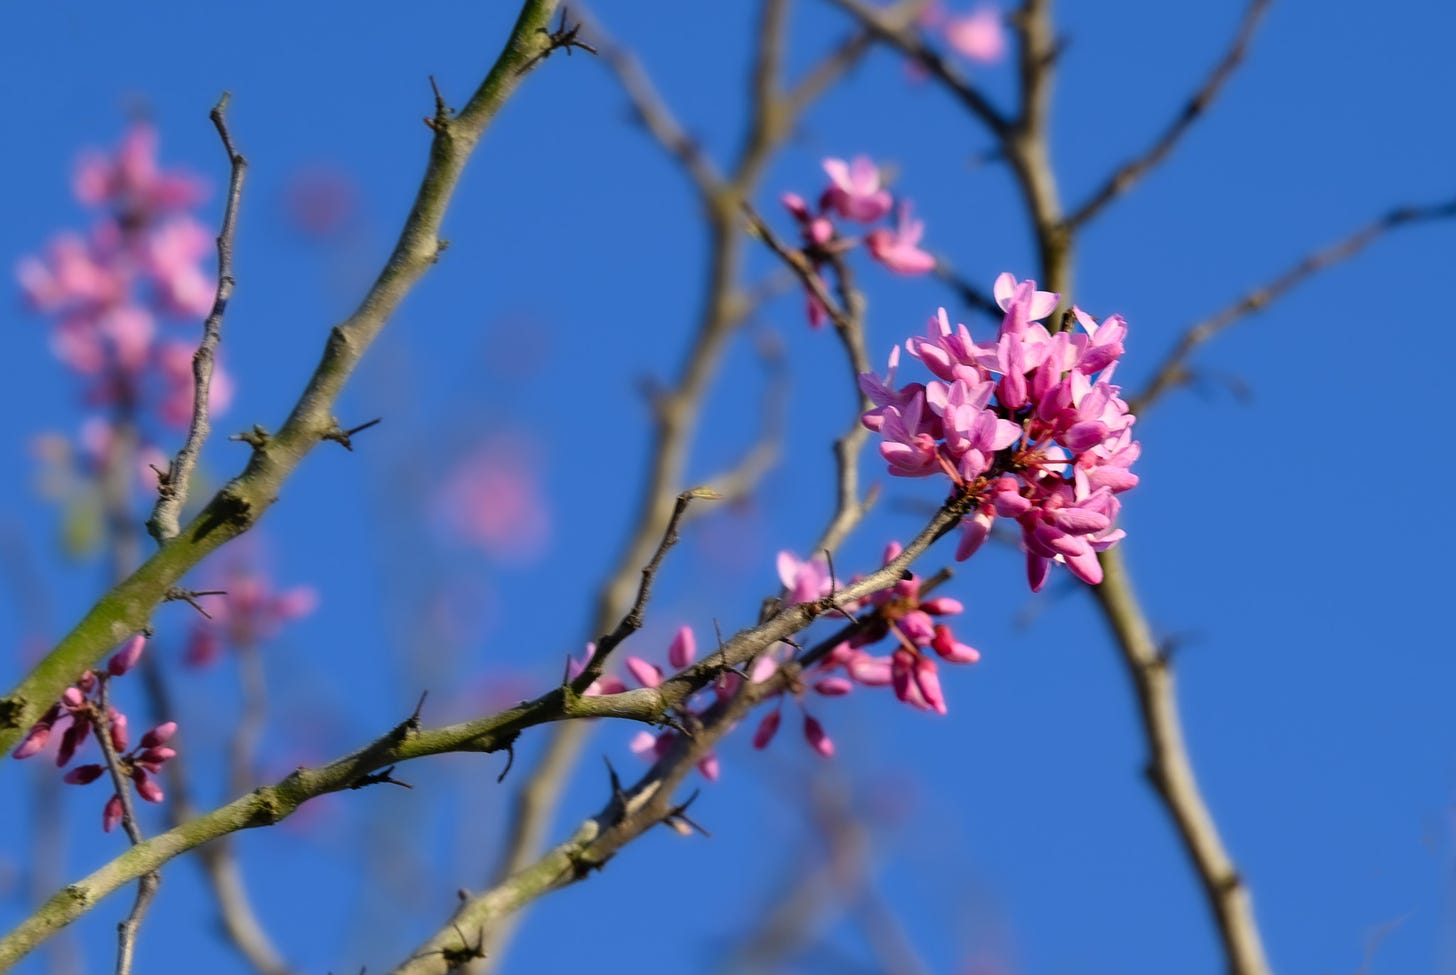 The pink blooms of the Red Bud tree with a single bloom in focus with a bright blue sky in the background